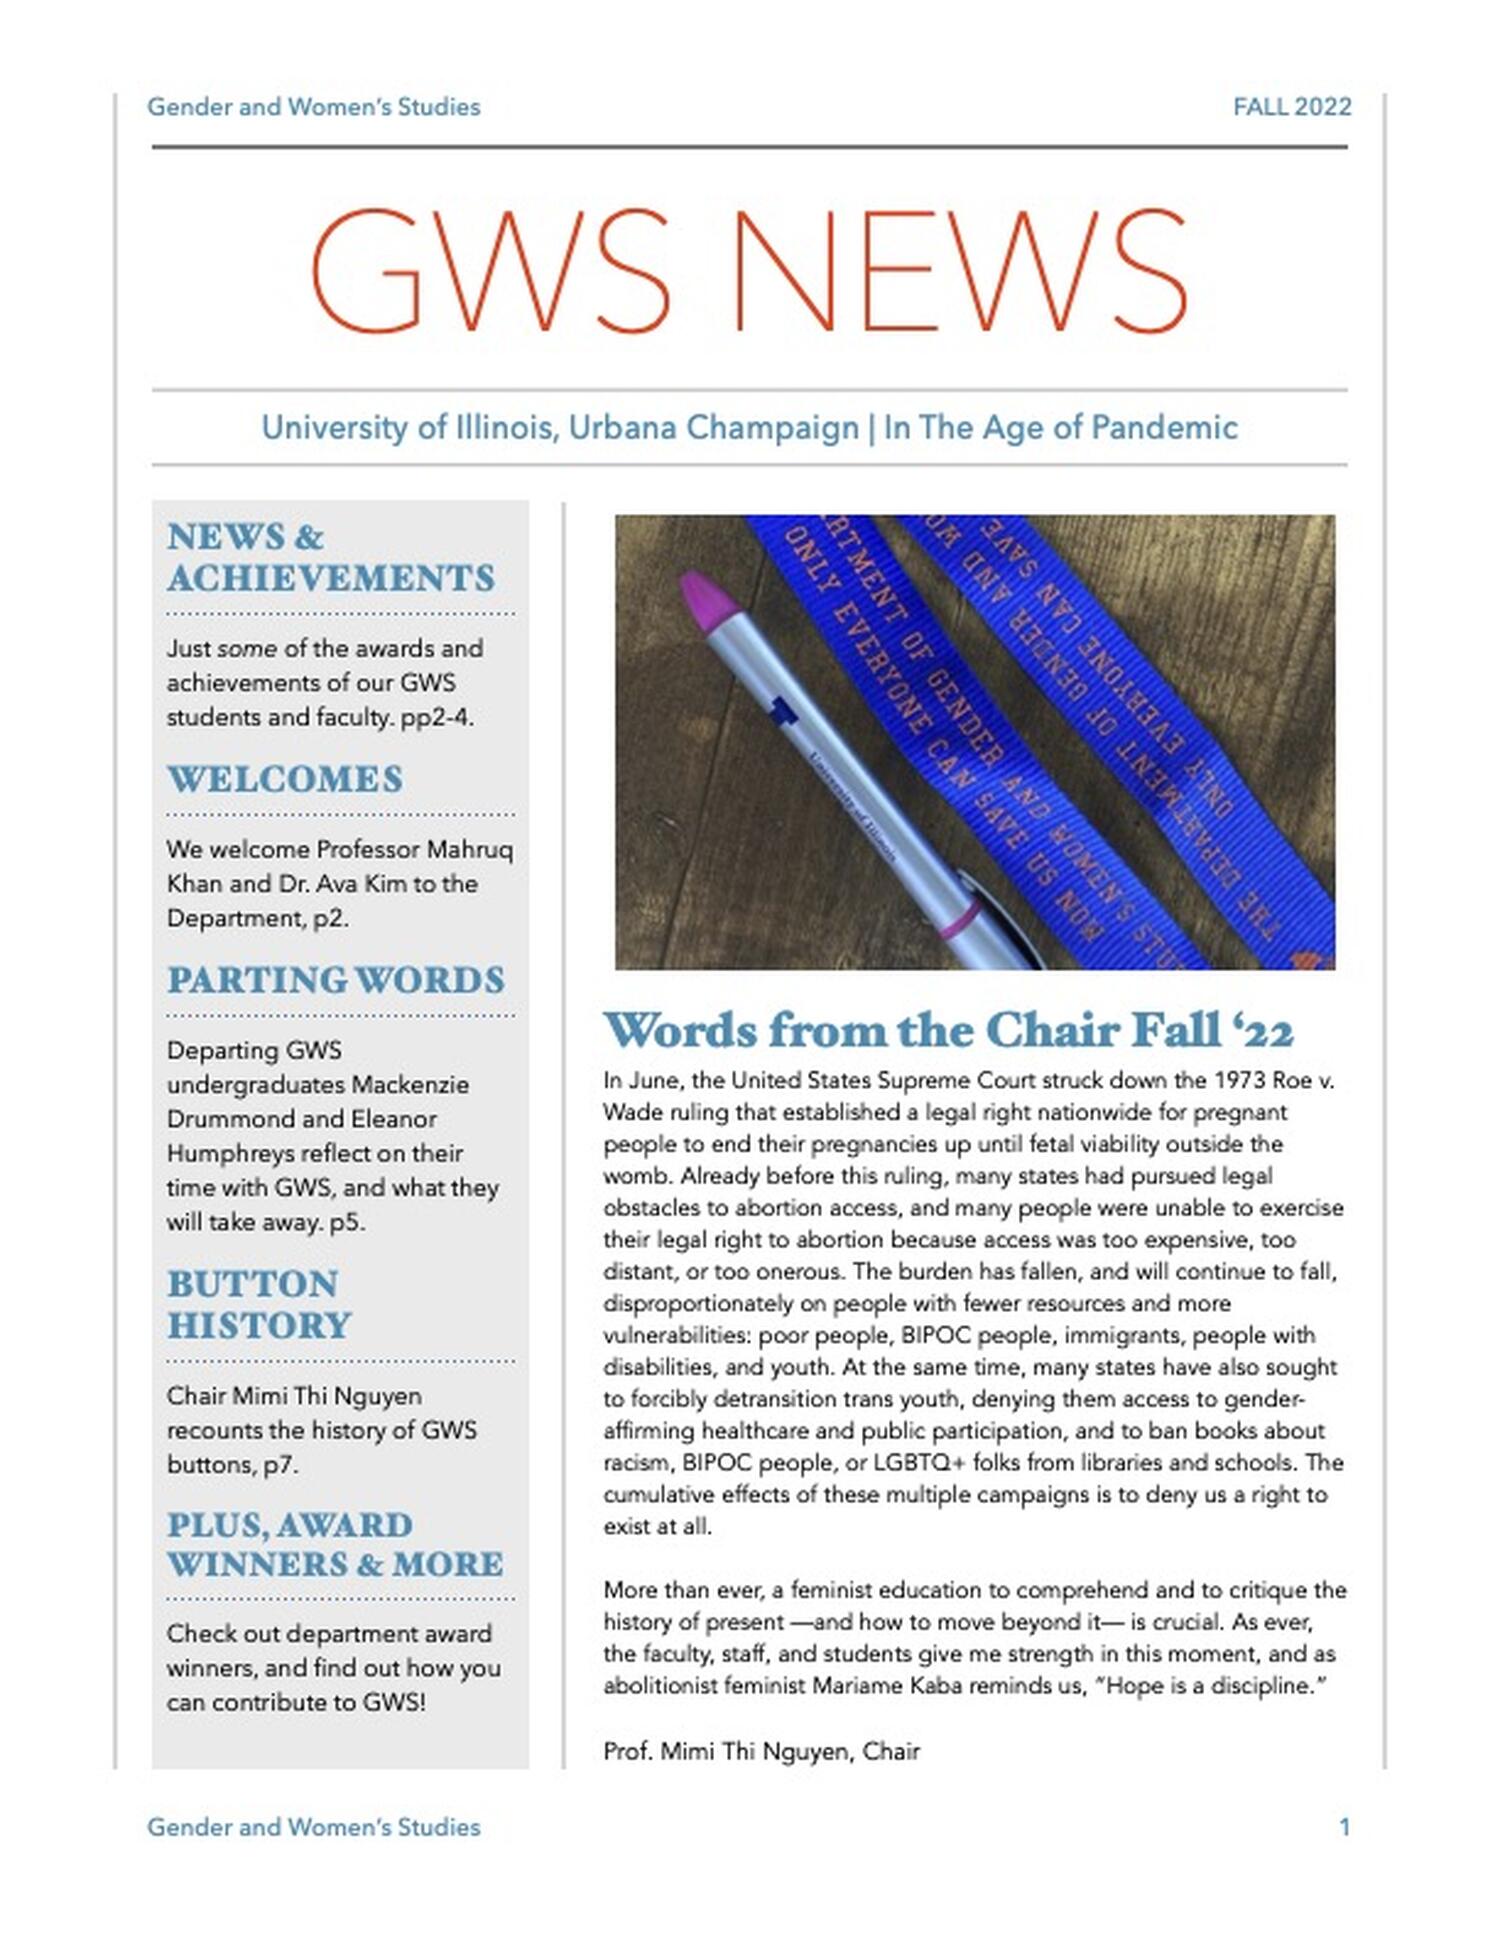 The first page of the GWS Fall 2022 newsletter.